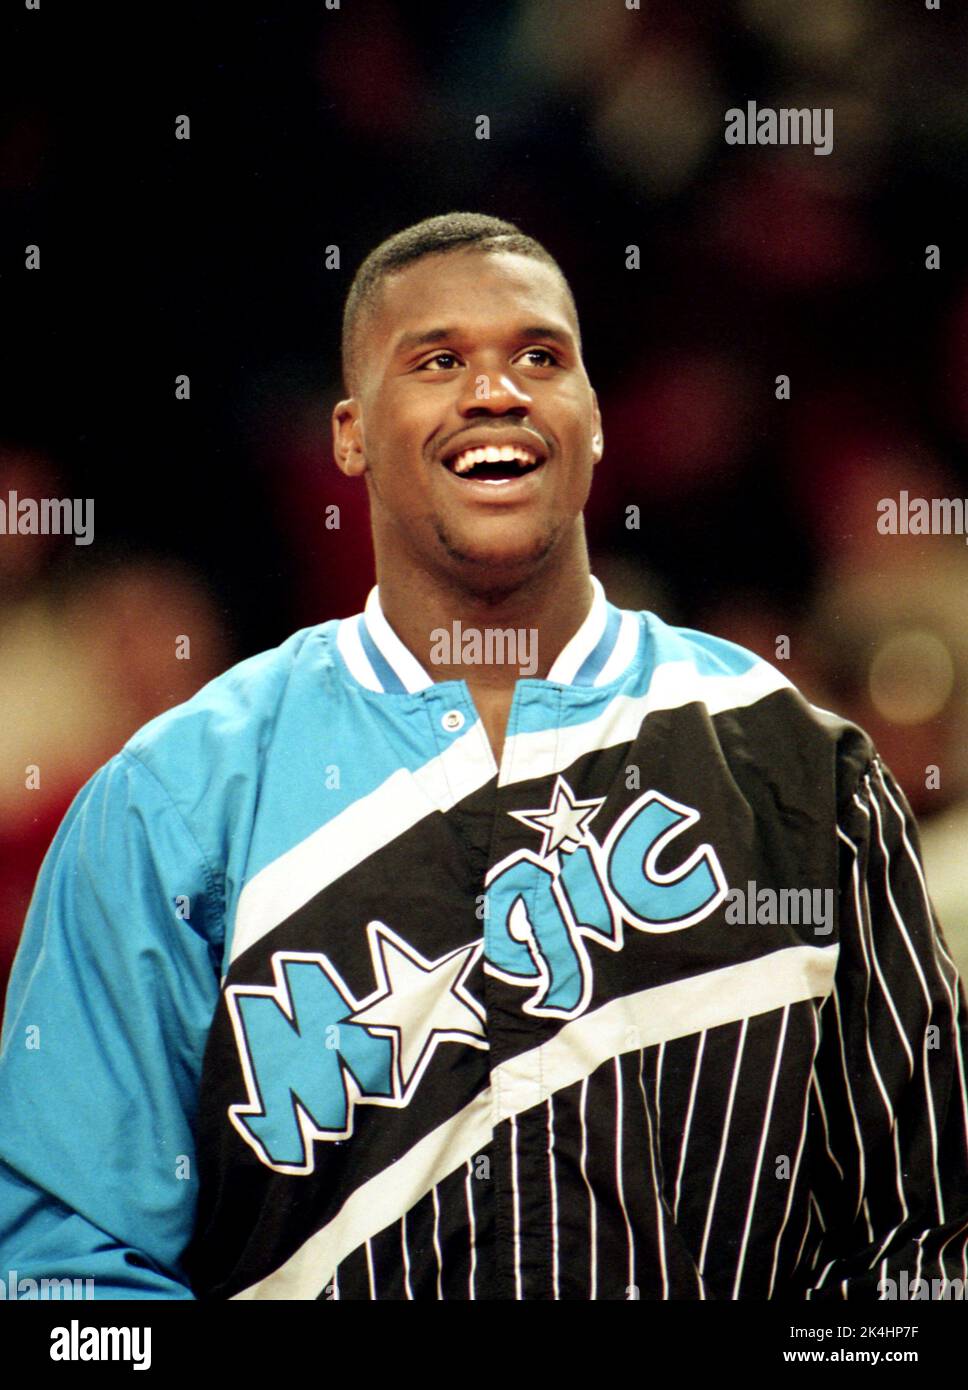 Orlando Magic center Shaquille O'Neal is shown during his rookie year during a game in Chicago against the Bulls. in 1992. Stock Photo